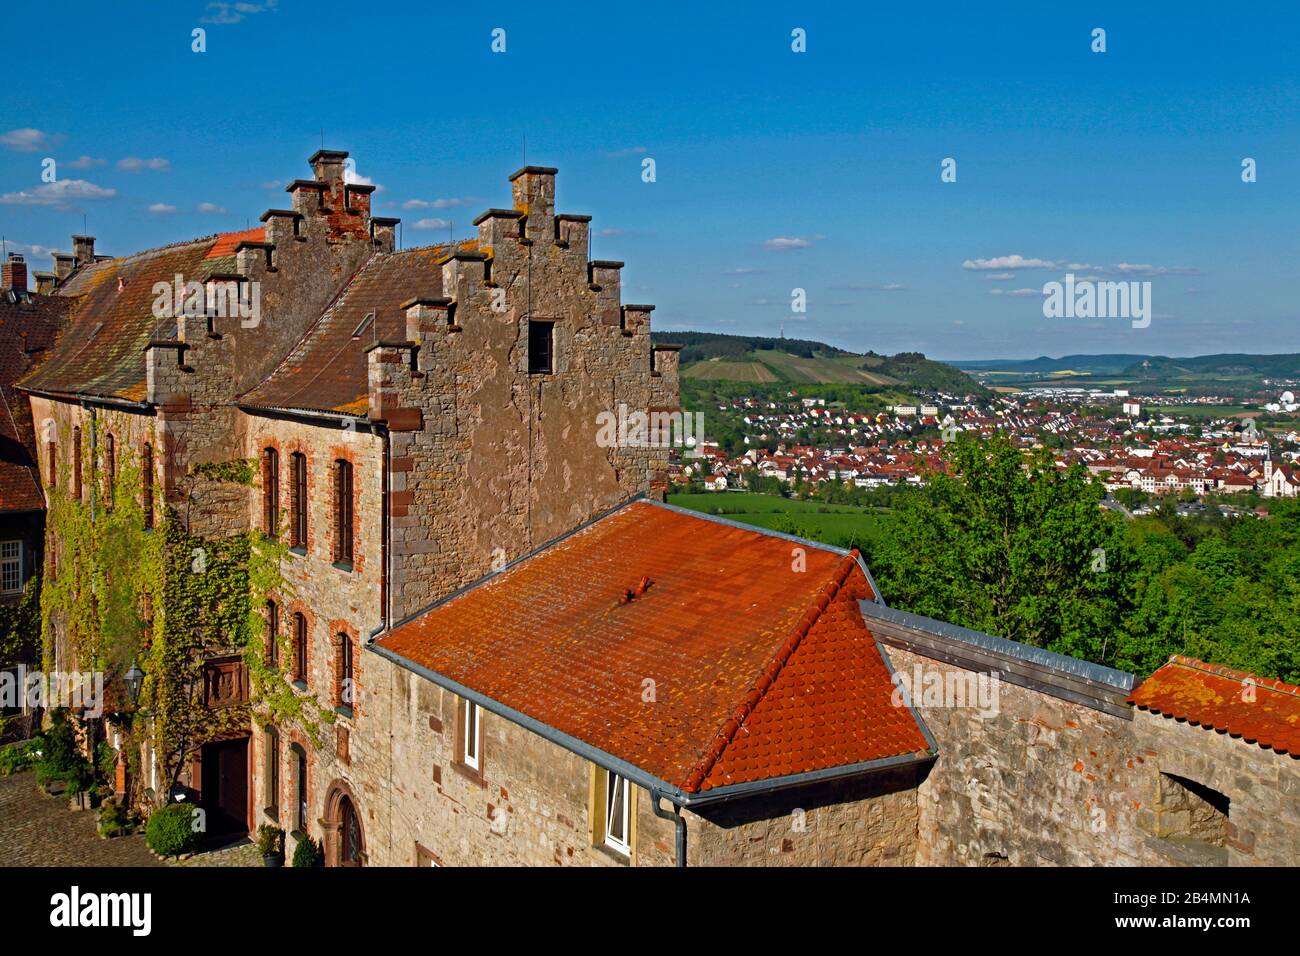 Germany, Bavaria, Lower Franconia, Hammelburg, Saaleck Castle, roots go back to the 12th century, in the background: City of Hammelburg Stock Photo